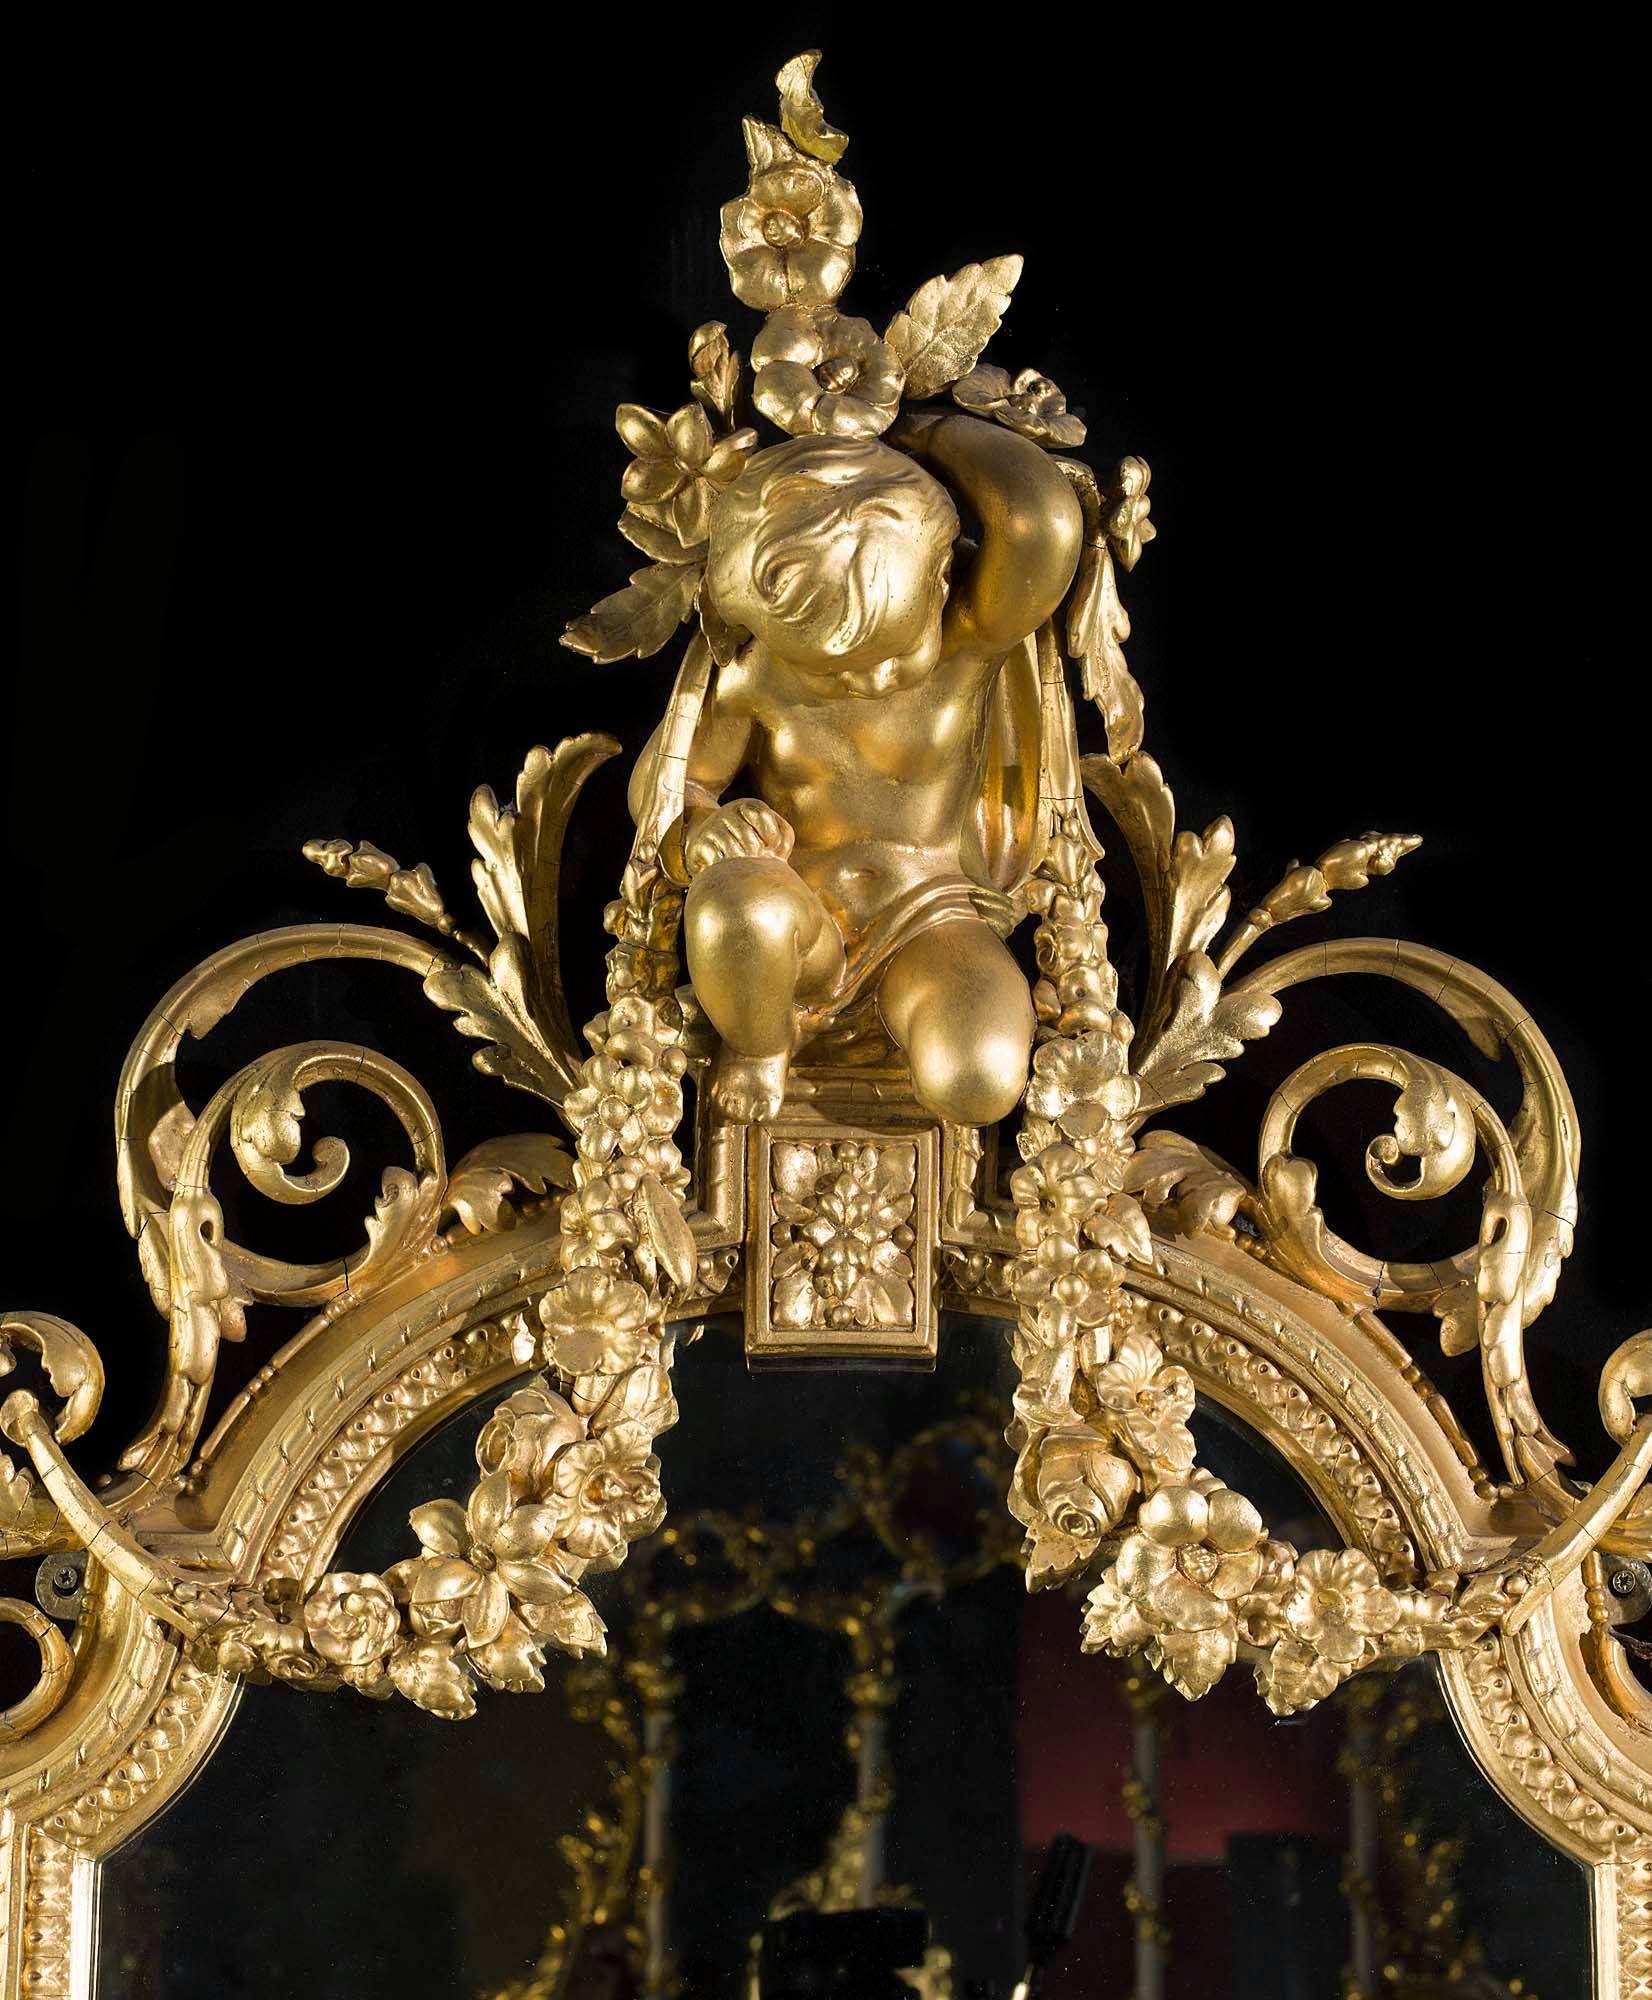 A sumptuous antique giltwood and gesso Louis XV style girandole mirror. The generous pediment is in the form a single putti holding aloft garlands of summer flowers among scrolling foliage. This is set above the arched topped mirror with its